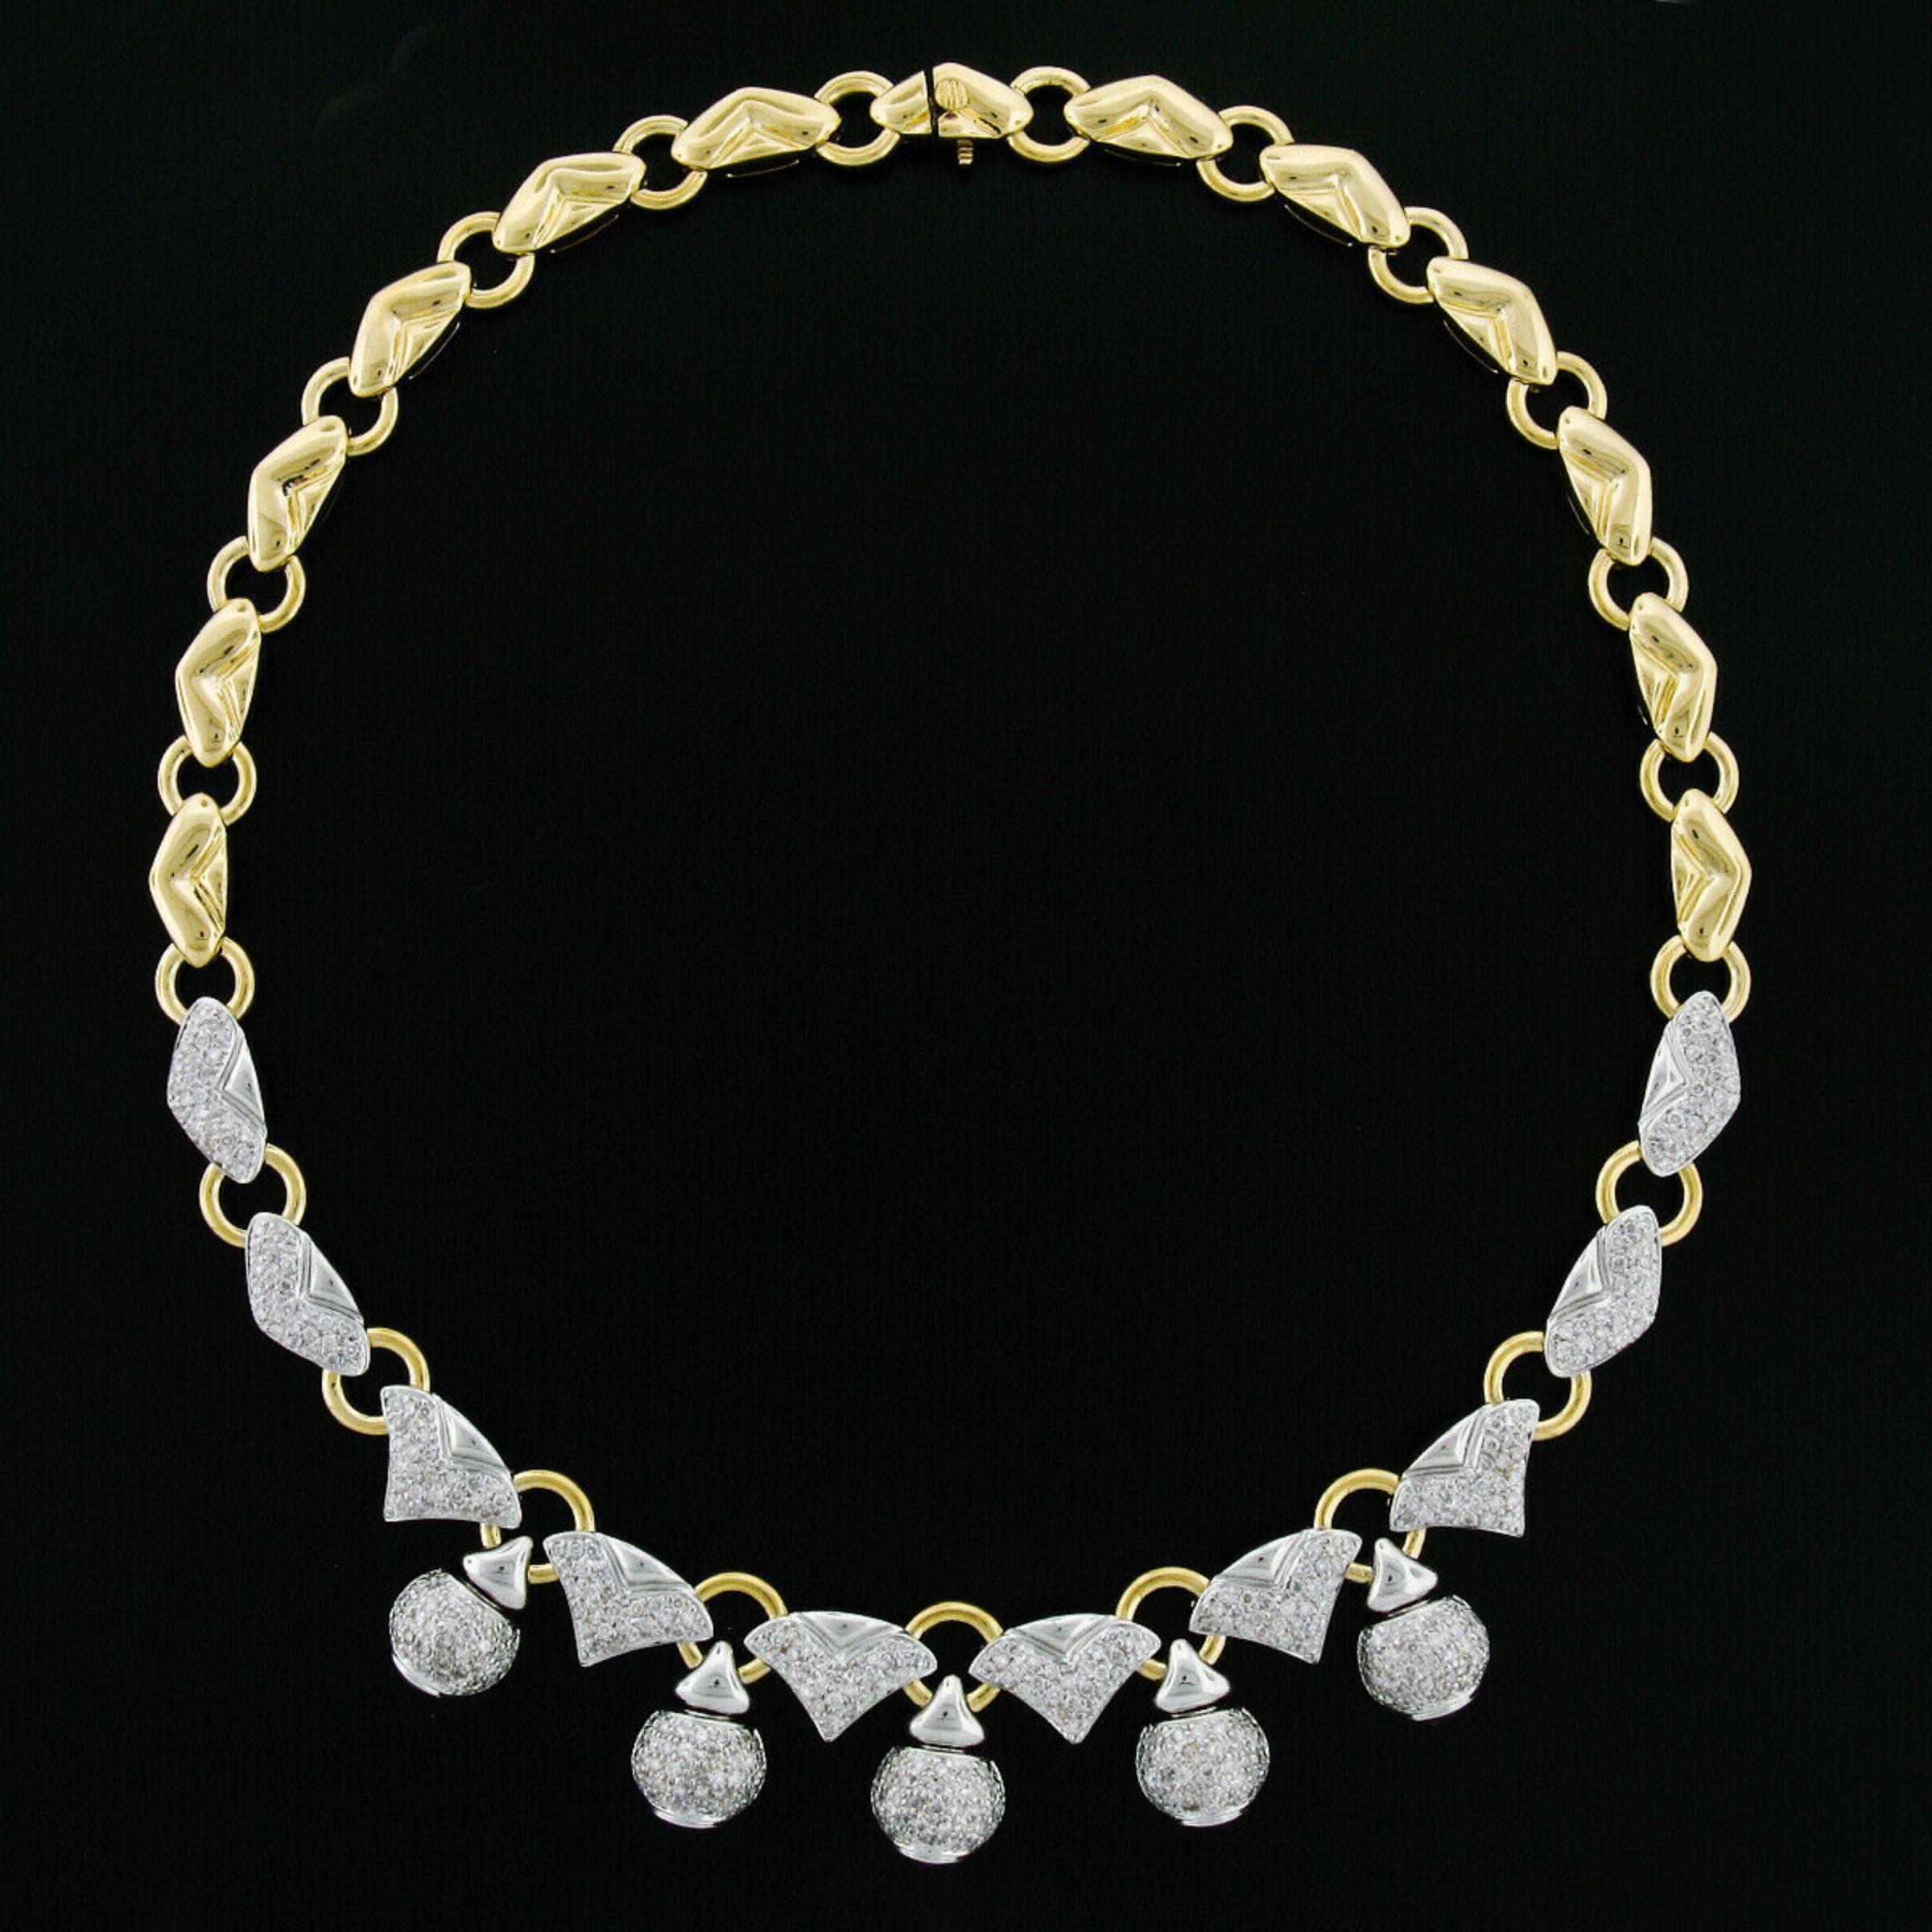 Here we have a very well and solidly made diamond collar necklace crafted in 18k yellow gold and features a truly substantial fringe design, drenched with 4.70 carats of fine quality diamonds throughout. The diamonds are neatly pave set across the